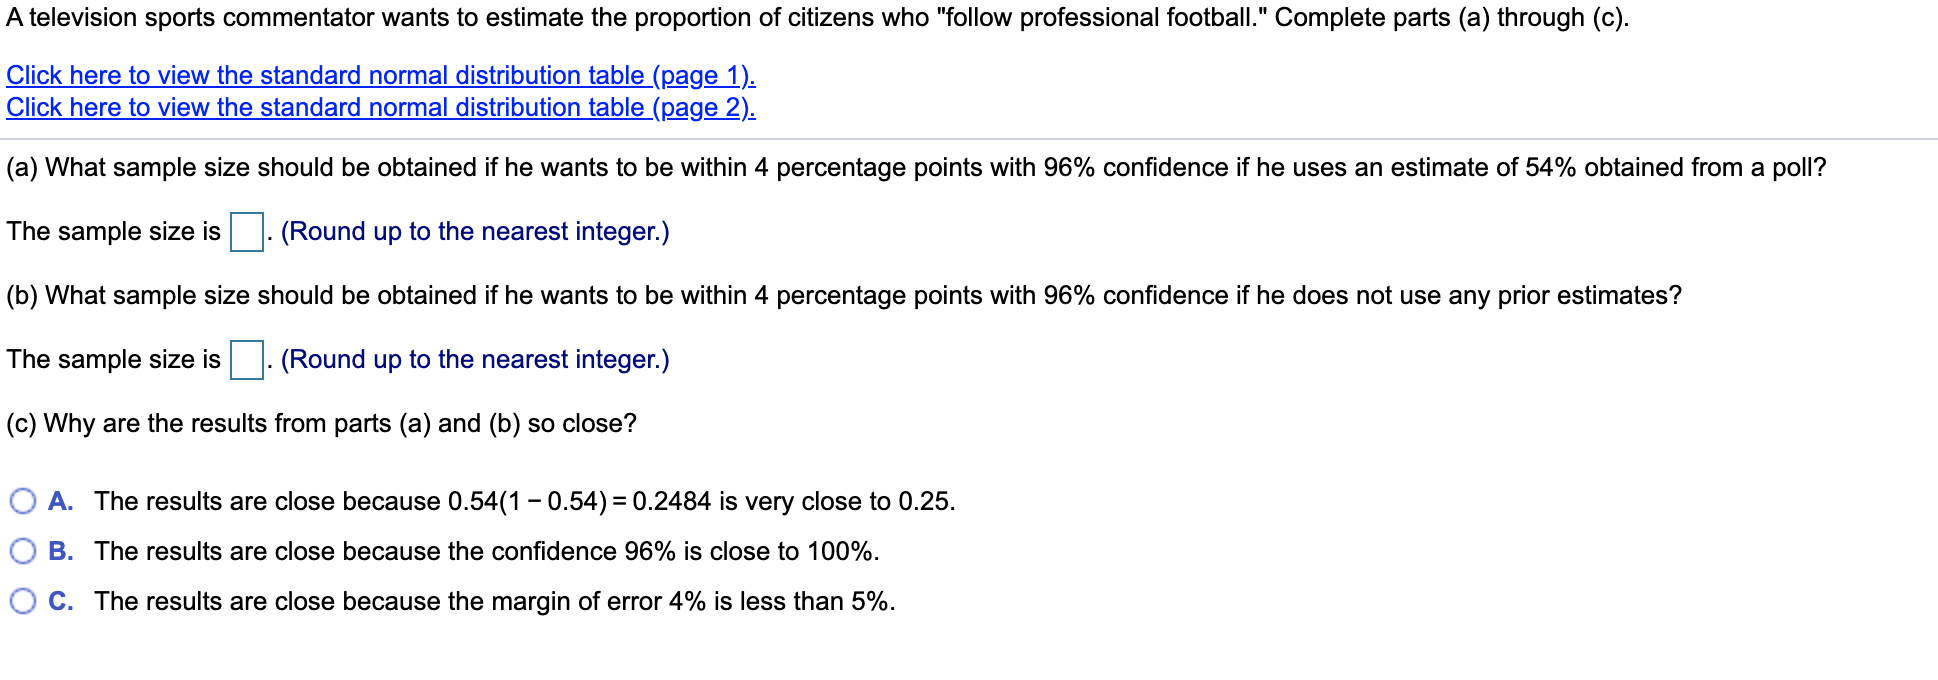 A television sports commentator wants to estimate the proportion of citizens who "follow professional football." Complete parts (a) through (c).
Click here to view the standard normal distribution table (page 1).
Click here to view the standard normal distribution table (page 2).
(a) What sample size should be obtained if he wants to be within 4 percentage points with 96% confidence if he uses an estimate of 54% obtained from a poll?
The sample size is
(Round up to the nearest integer.)
|(b) What sample size should be obtained if he wants to be within 4 percentage points with 96% confidence if he does not use any prior estimates?
The sample size is
(Round up to the nearest integer.)
|(c) Why are the results from parts (a) and (b) so close?
A. The results are close because 0.54(1 - 0.54) = 0.2484 is very close to 0.25.
B. The results are close because the confidence 96% is close to 100%.
C. The results are close because the margin of error 4% is less than 5%.
